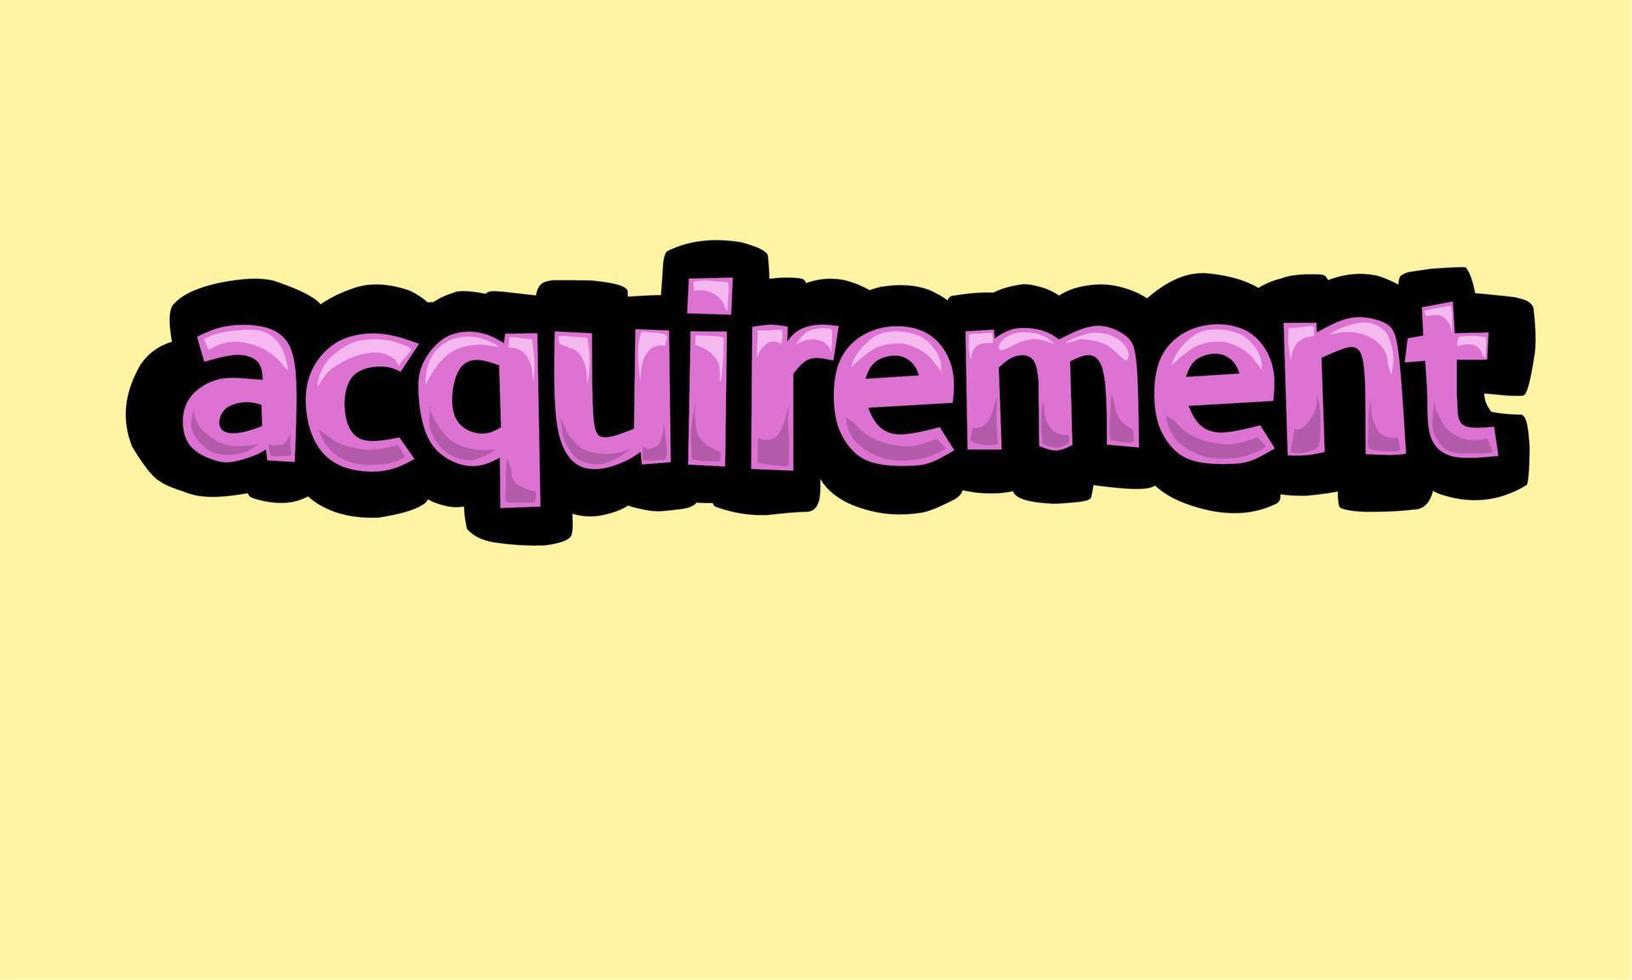 ACQUIREMENT writing vector design on a yellow background